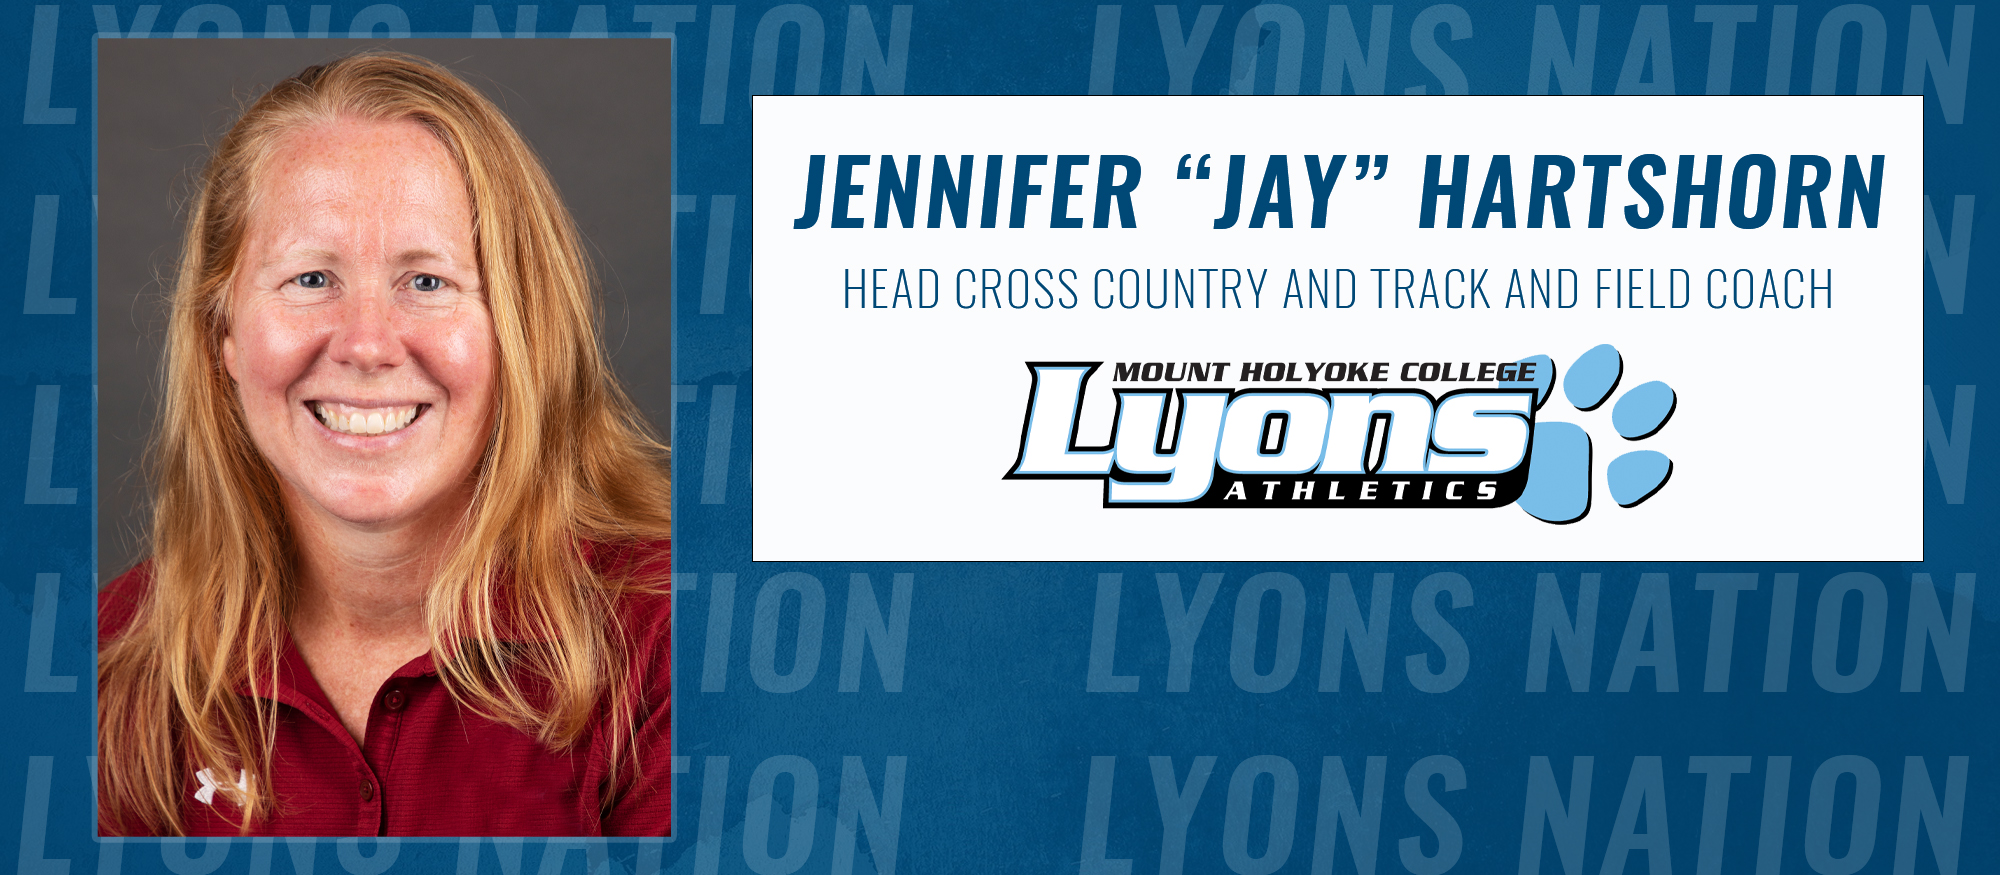 Jennifer 'Jay' Hartshorn Named Head Cross Country and Track and Field Coach at Mount Holyoke College